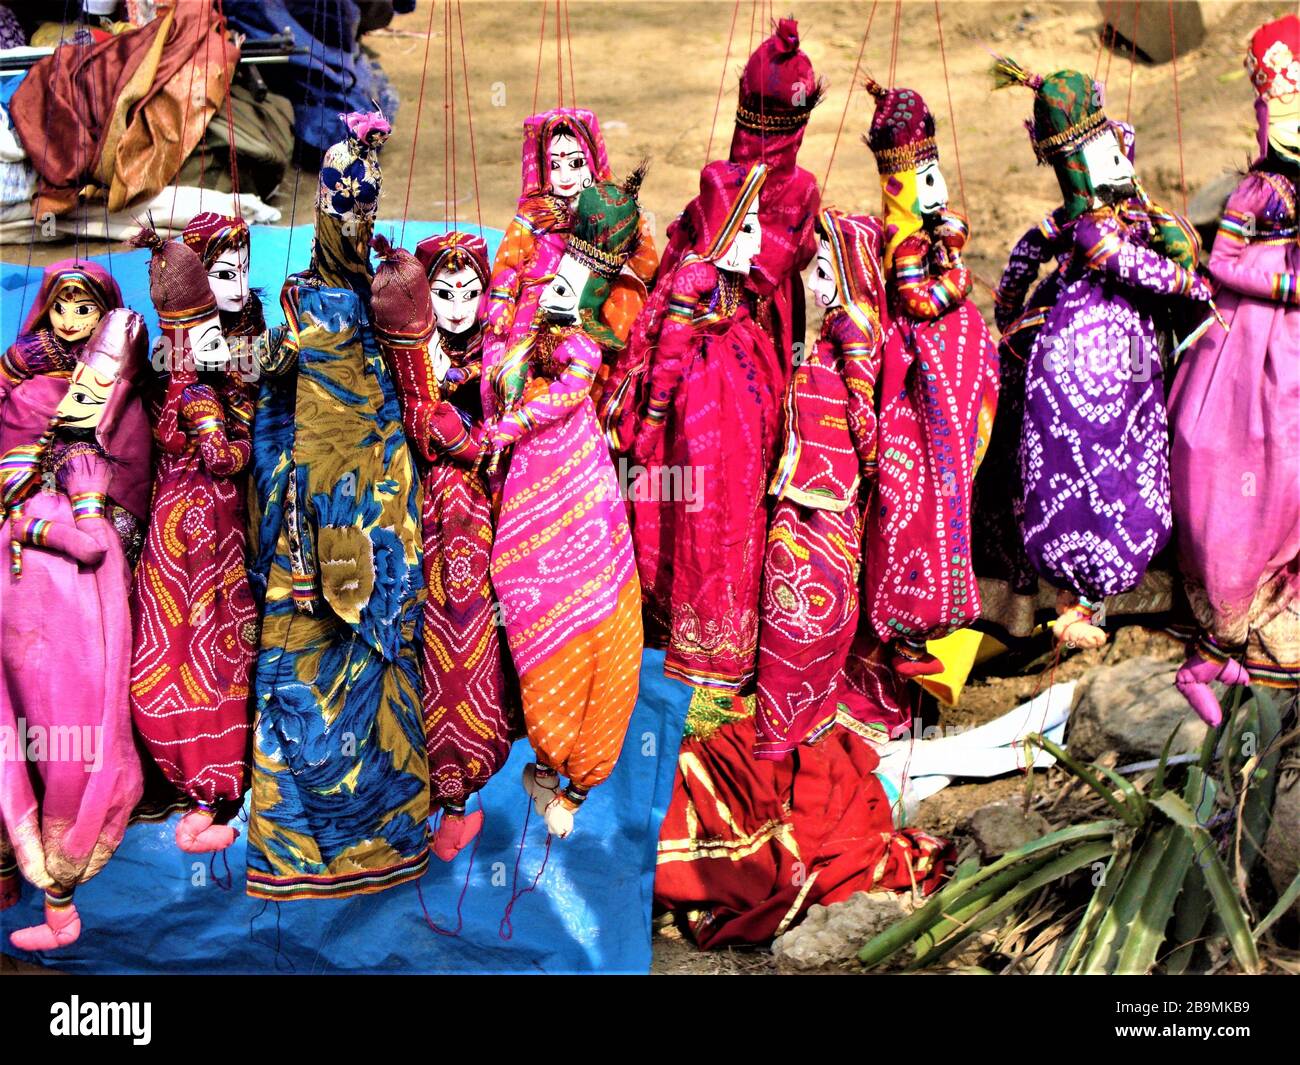 Group of multicolored Indian puppets at Surajkund Craft Mela, India Stock Photo